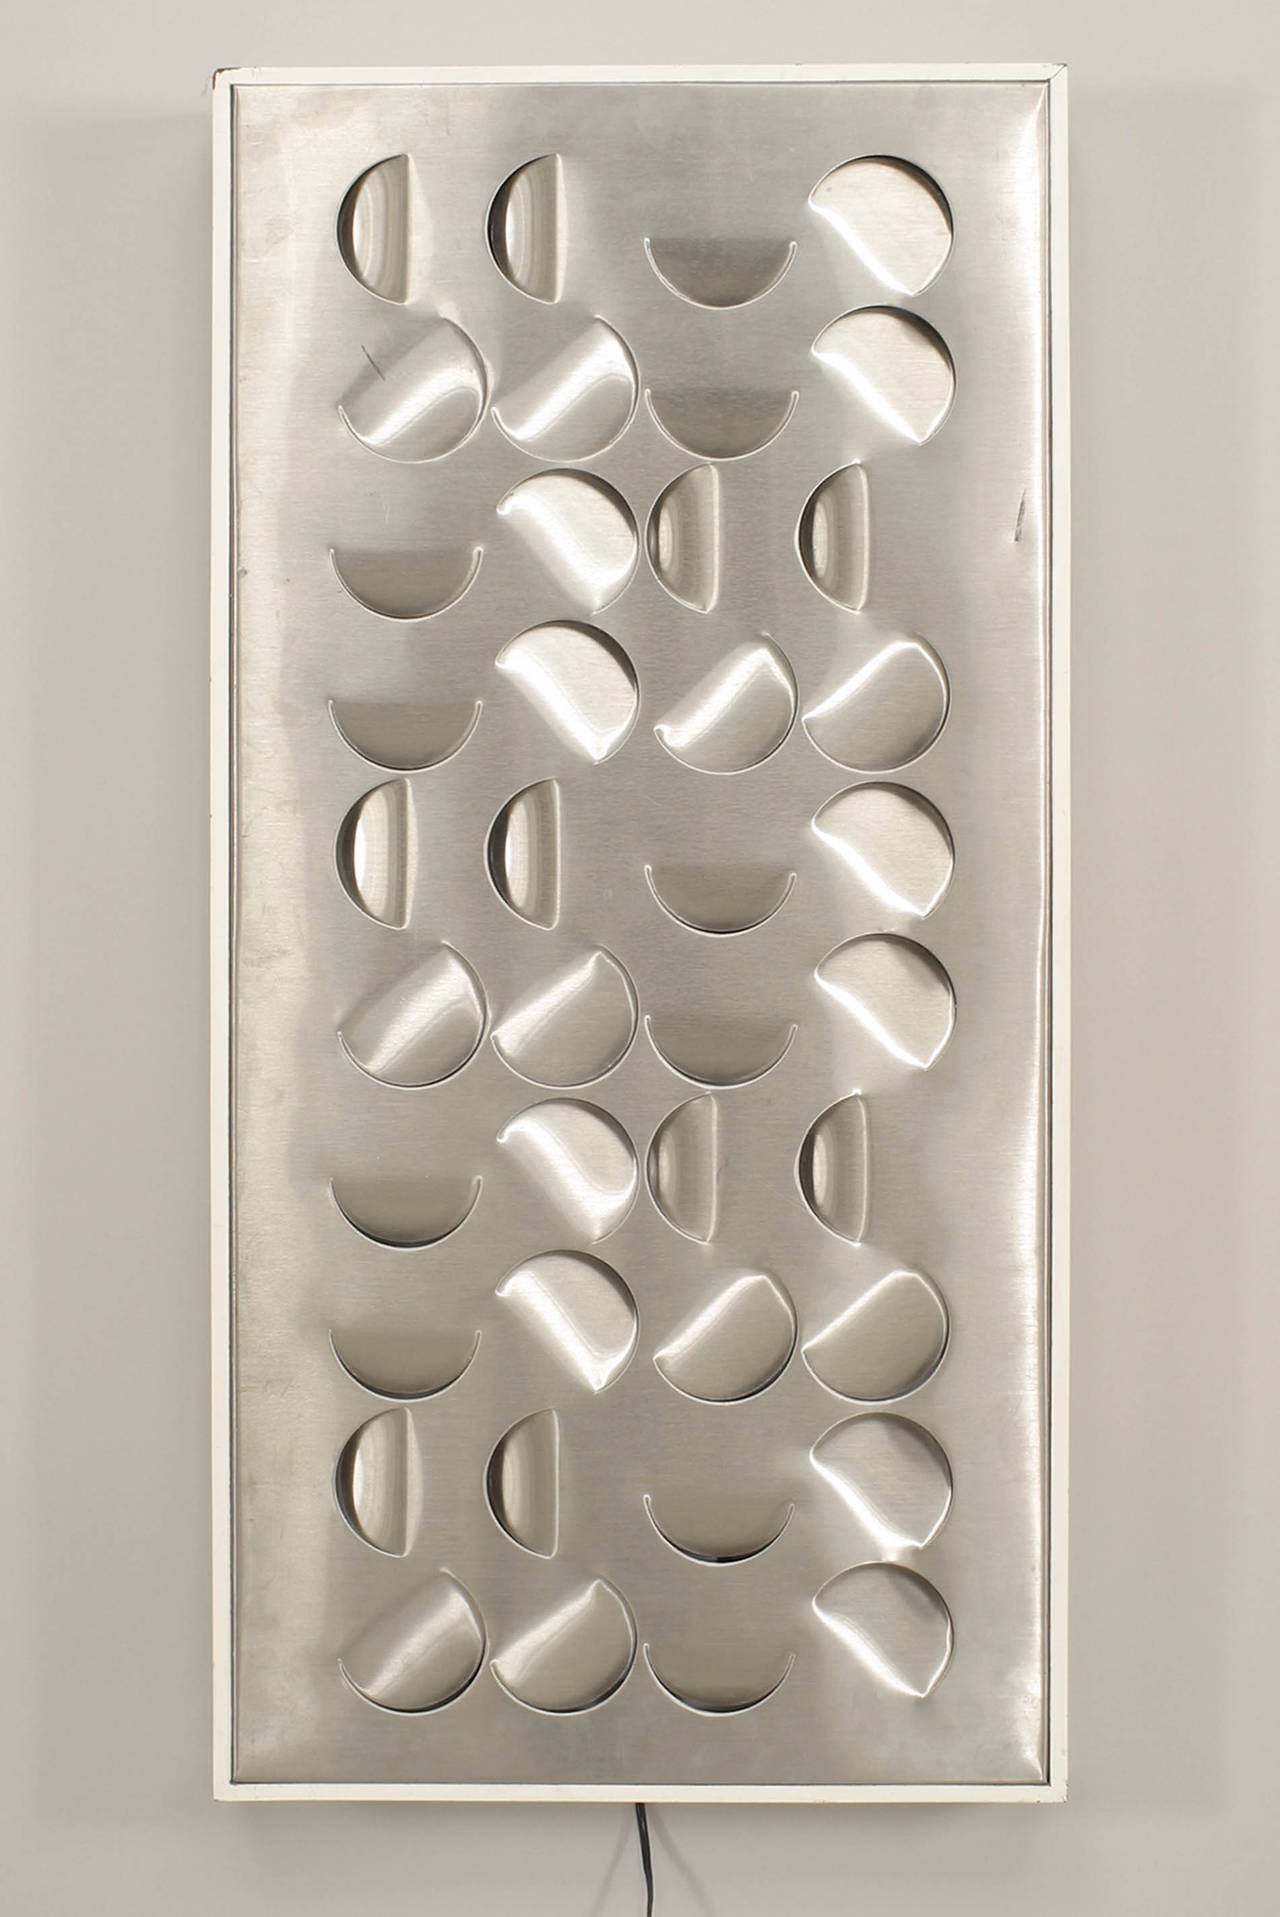 1960's Italian Modernist aluminum rectangular wall light with half round cut out
designs in a white lacquered frame, by Giacomo Benevelli.